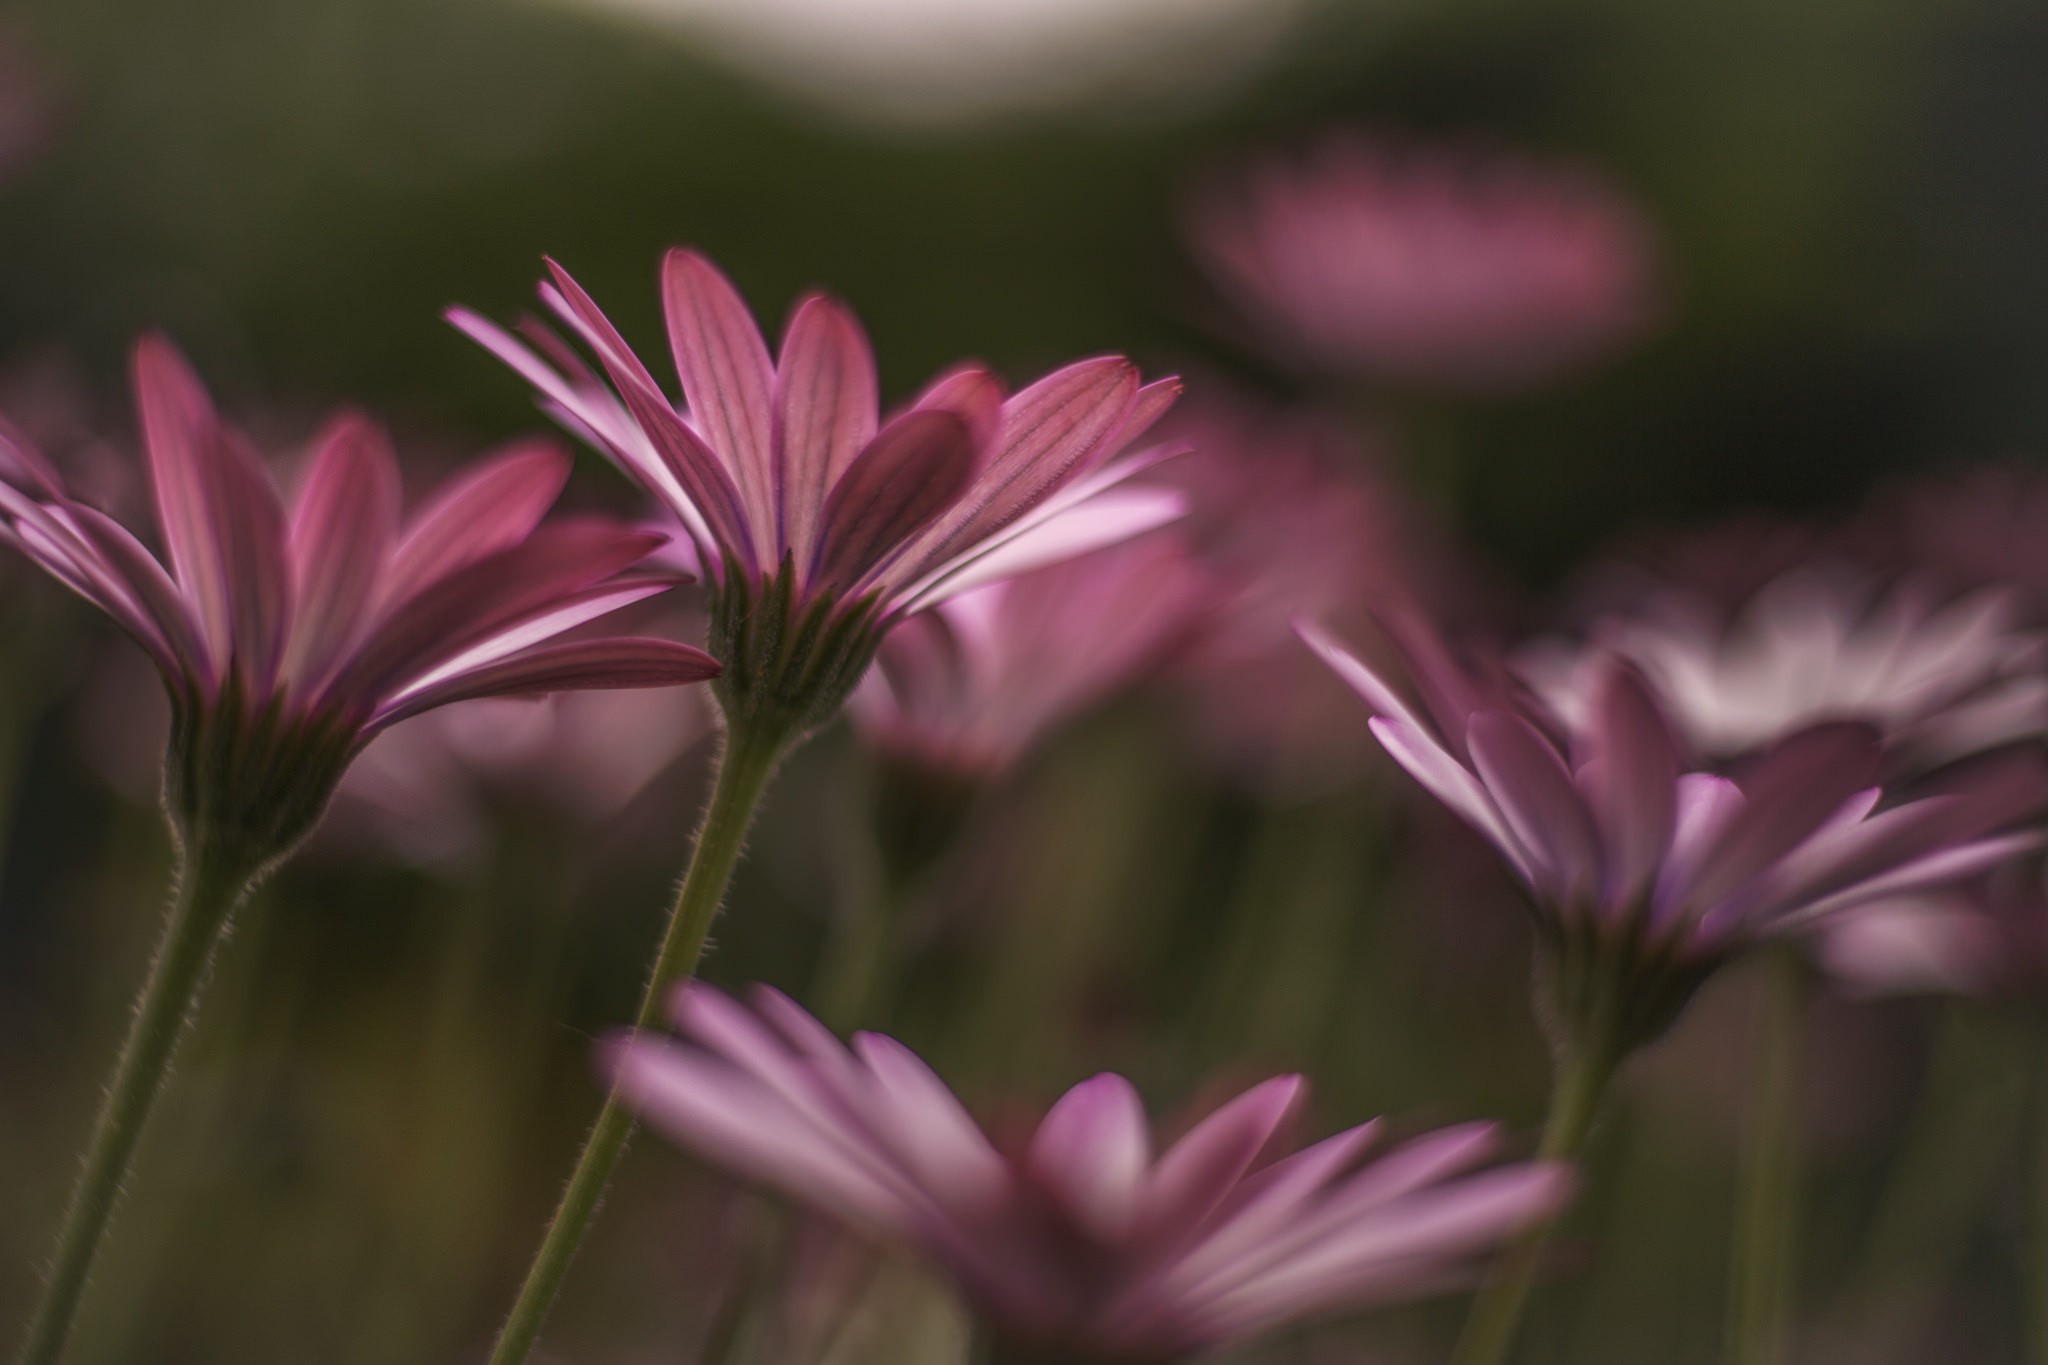 General 2048x1365 photography nature flowers macro pink flowers plants